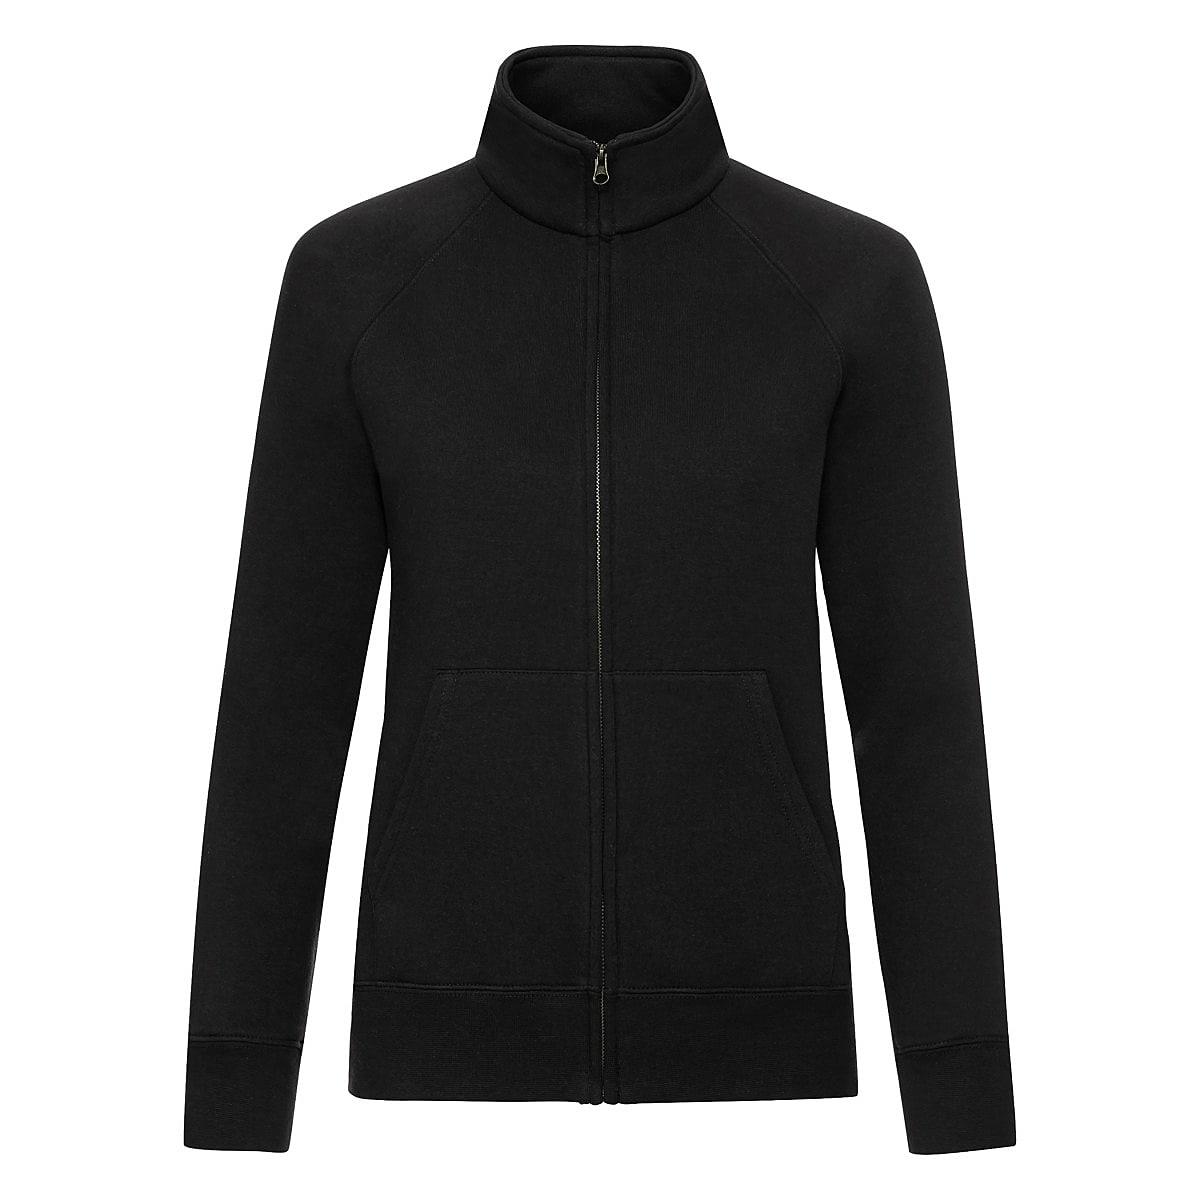 Fruit Of The Loom Lady-Fit Sweat Jacket in Black (Product Code: 62116)